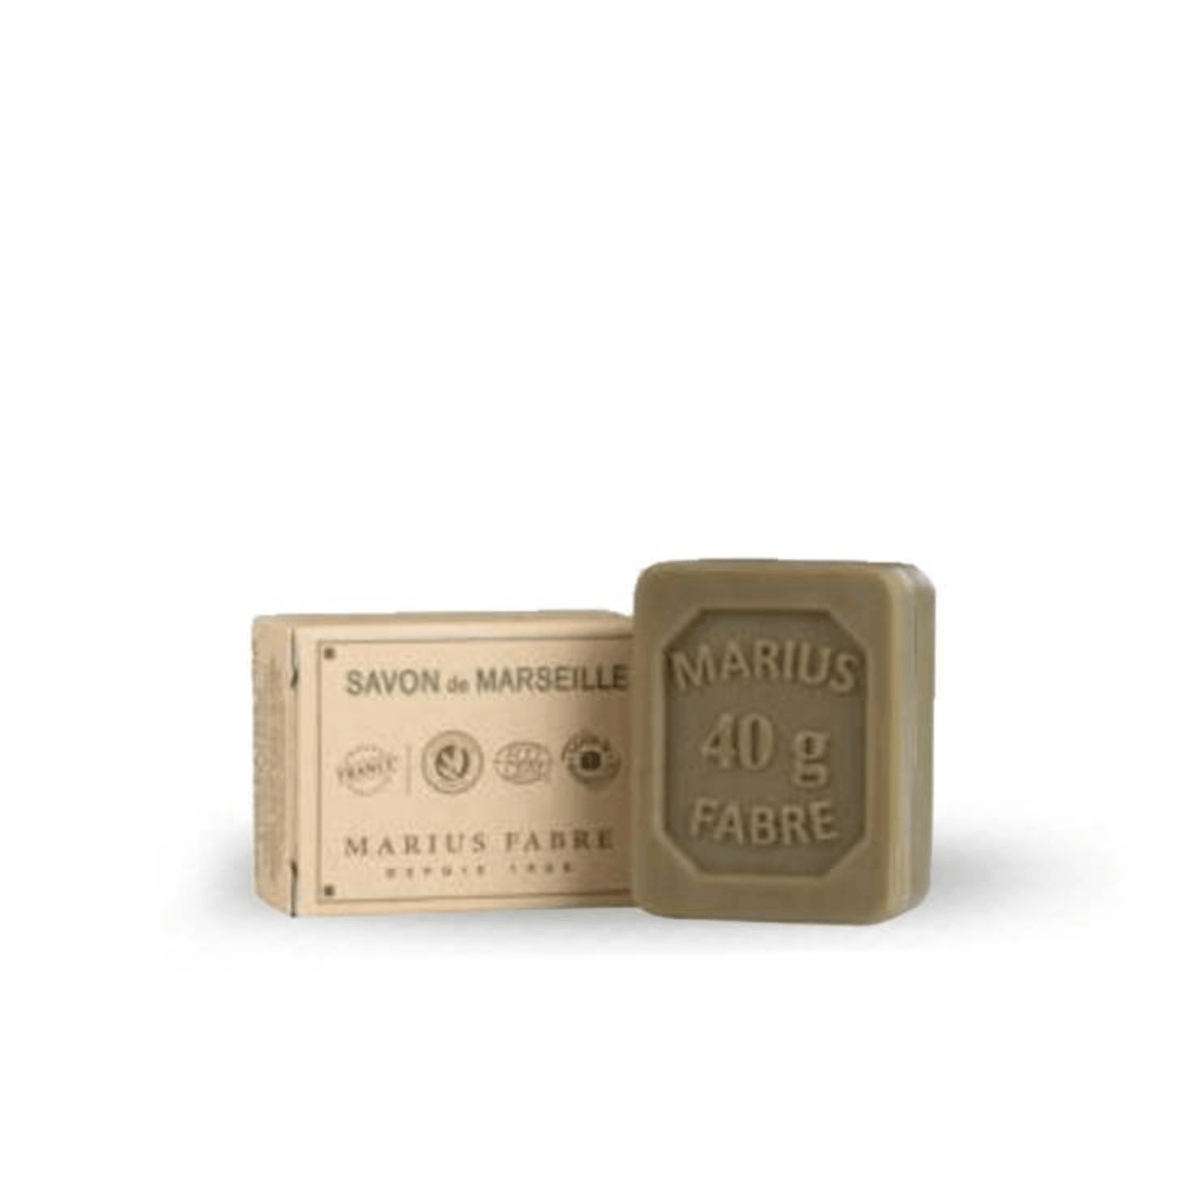 Primary Image of Olive Oil Marseille Bar Soap